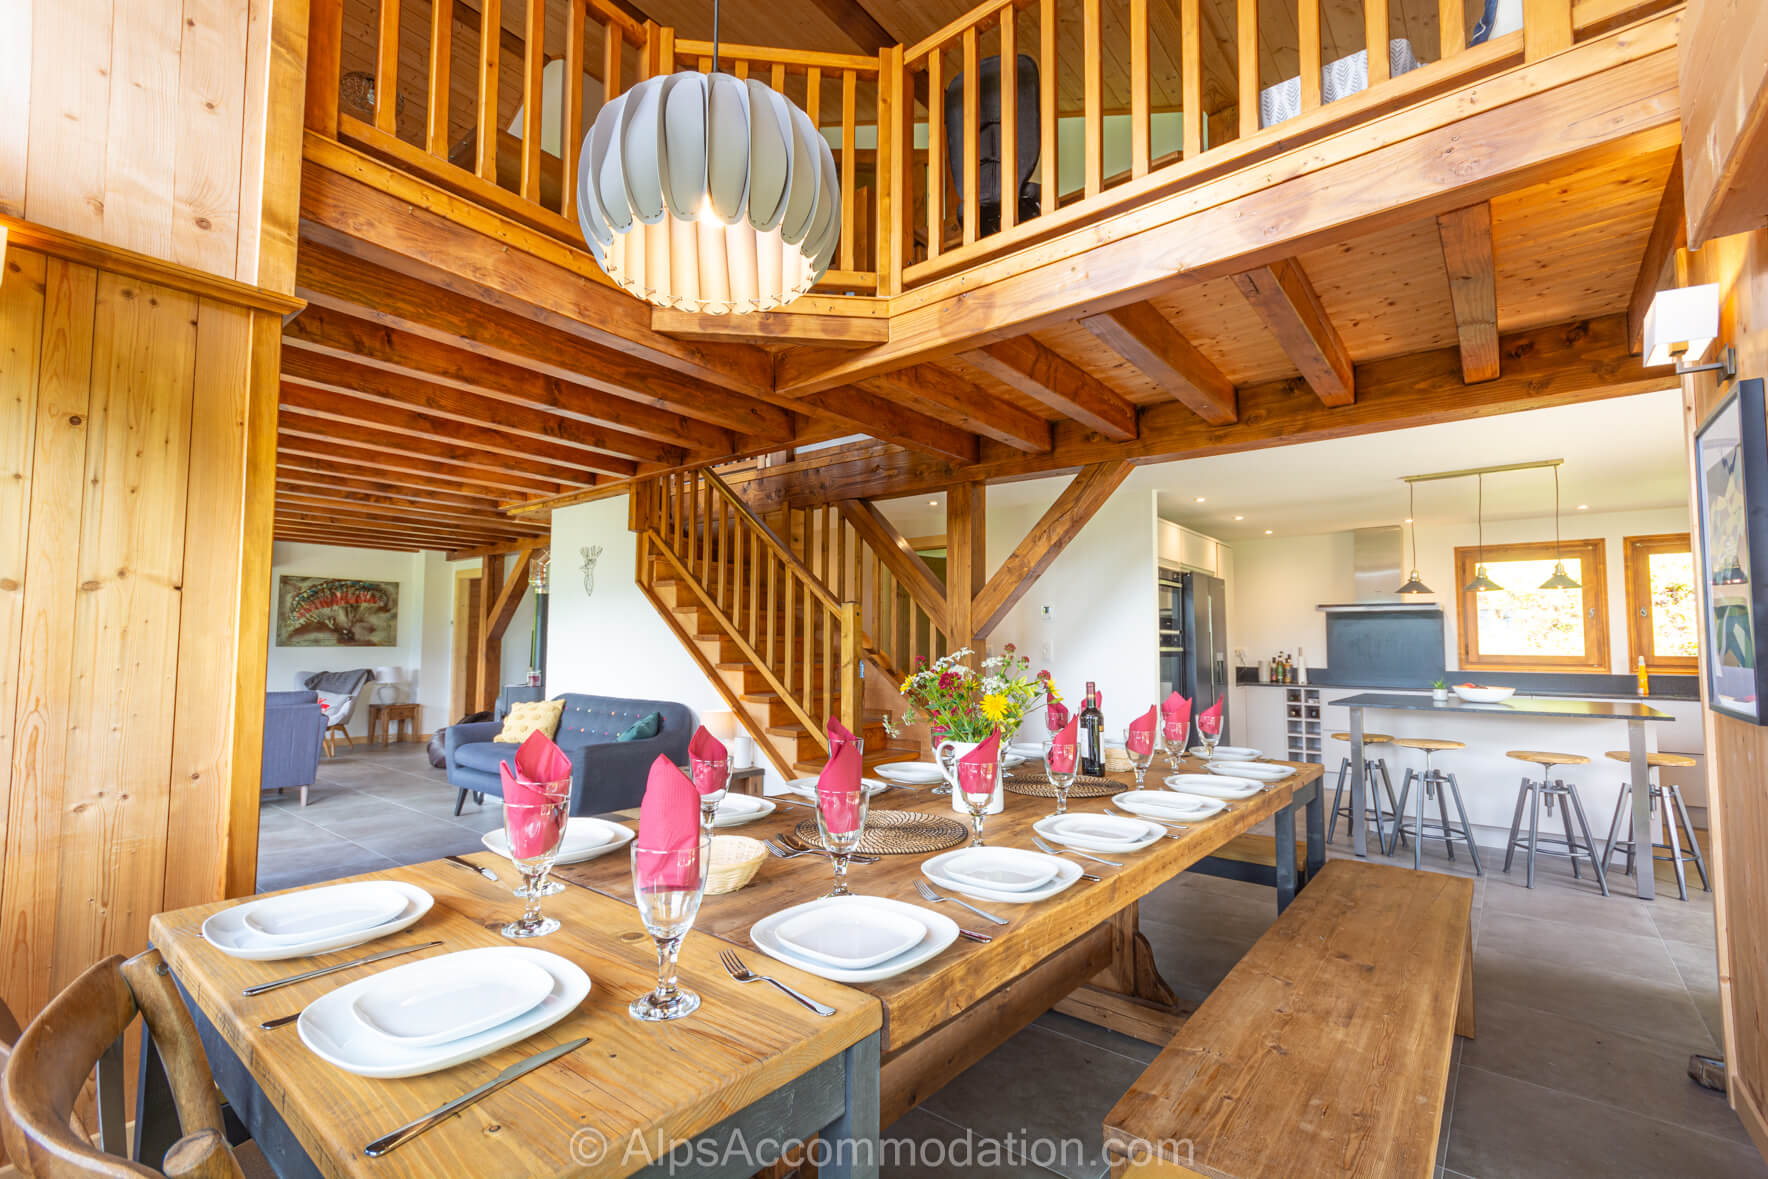 Chalet Marguerite Samoëns - Large dining table seating up to 16 people comfortably